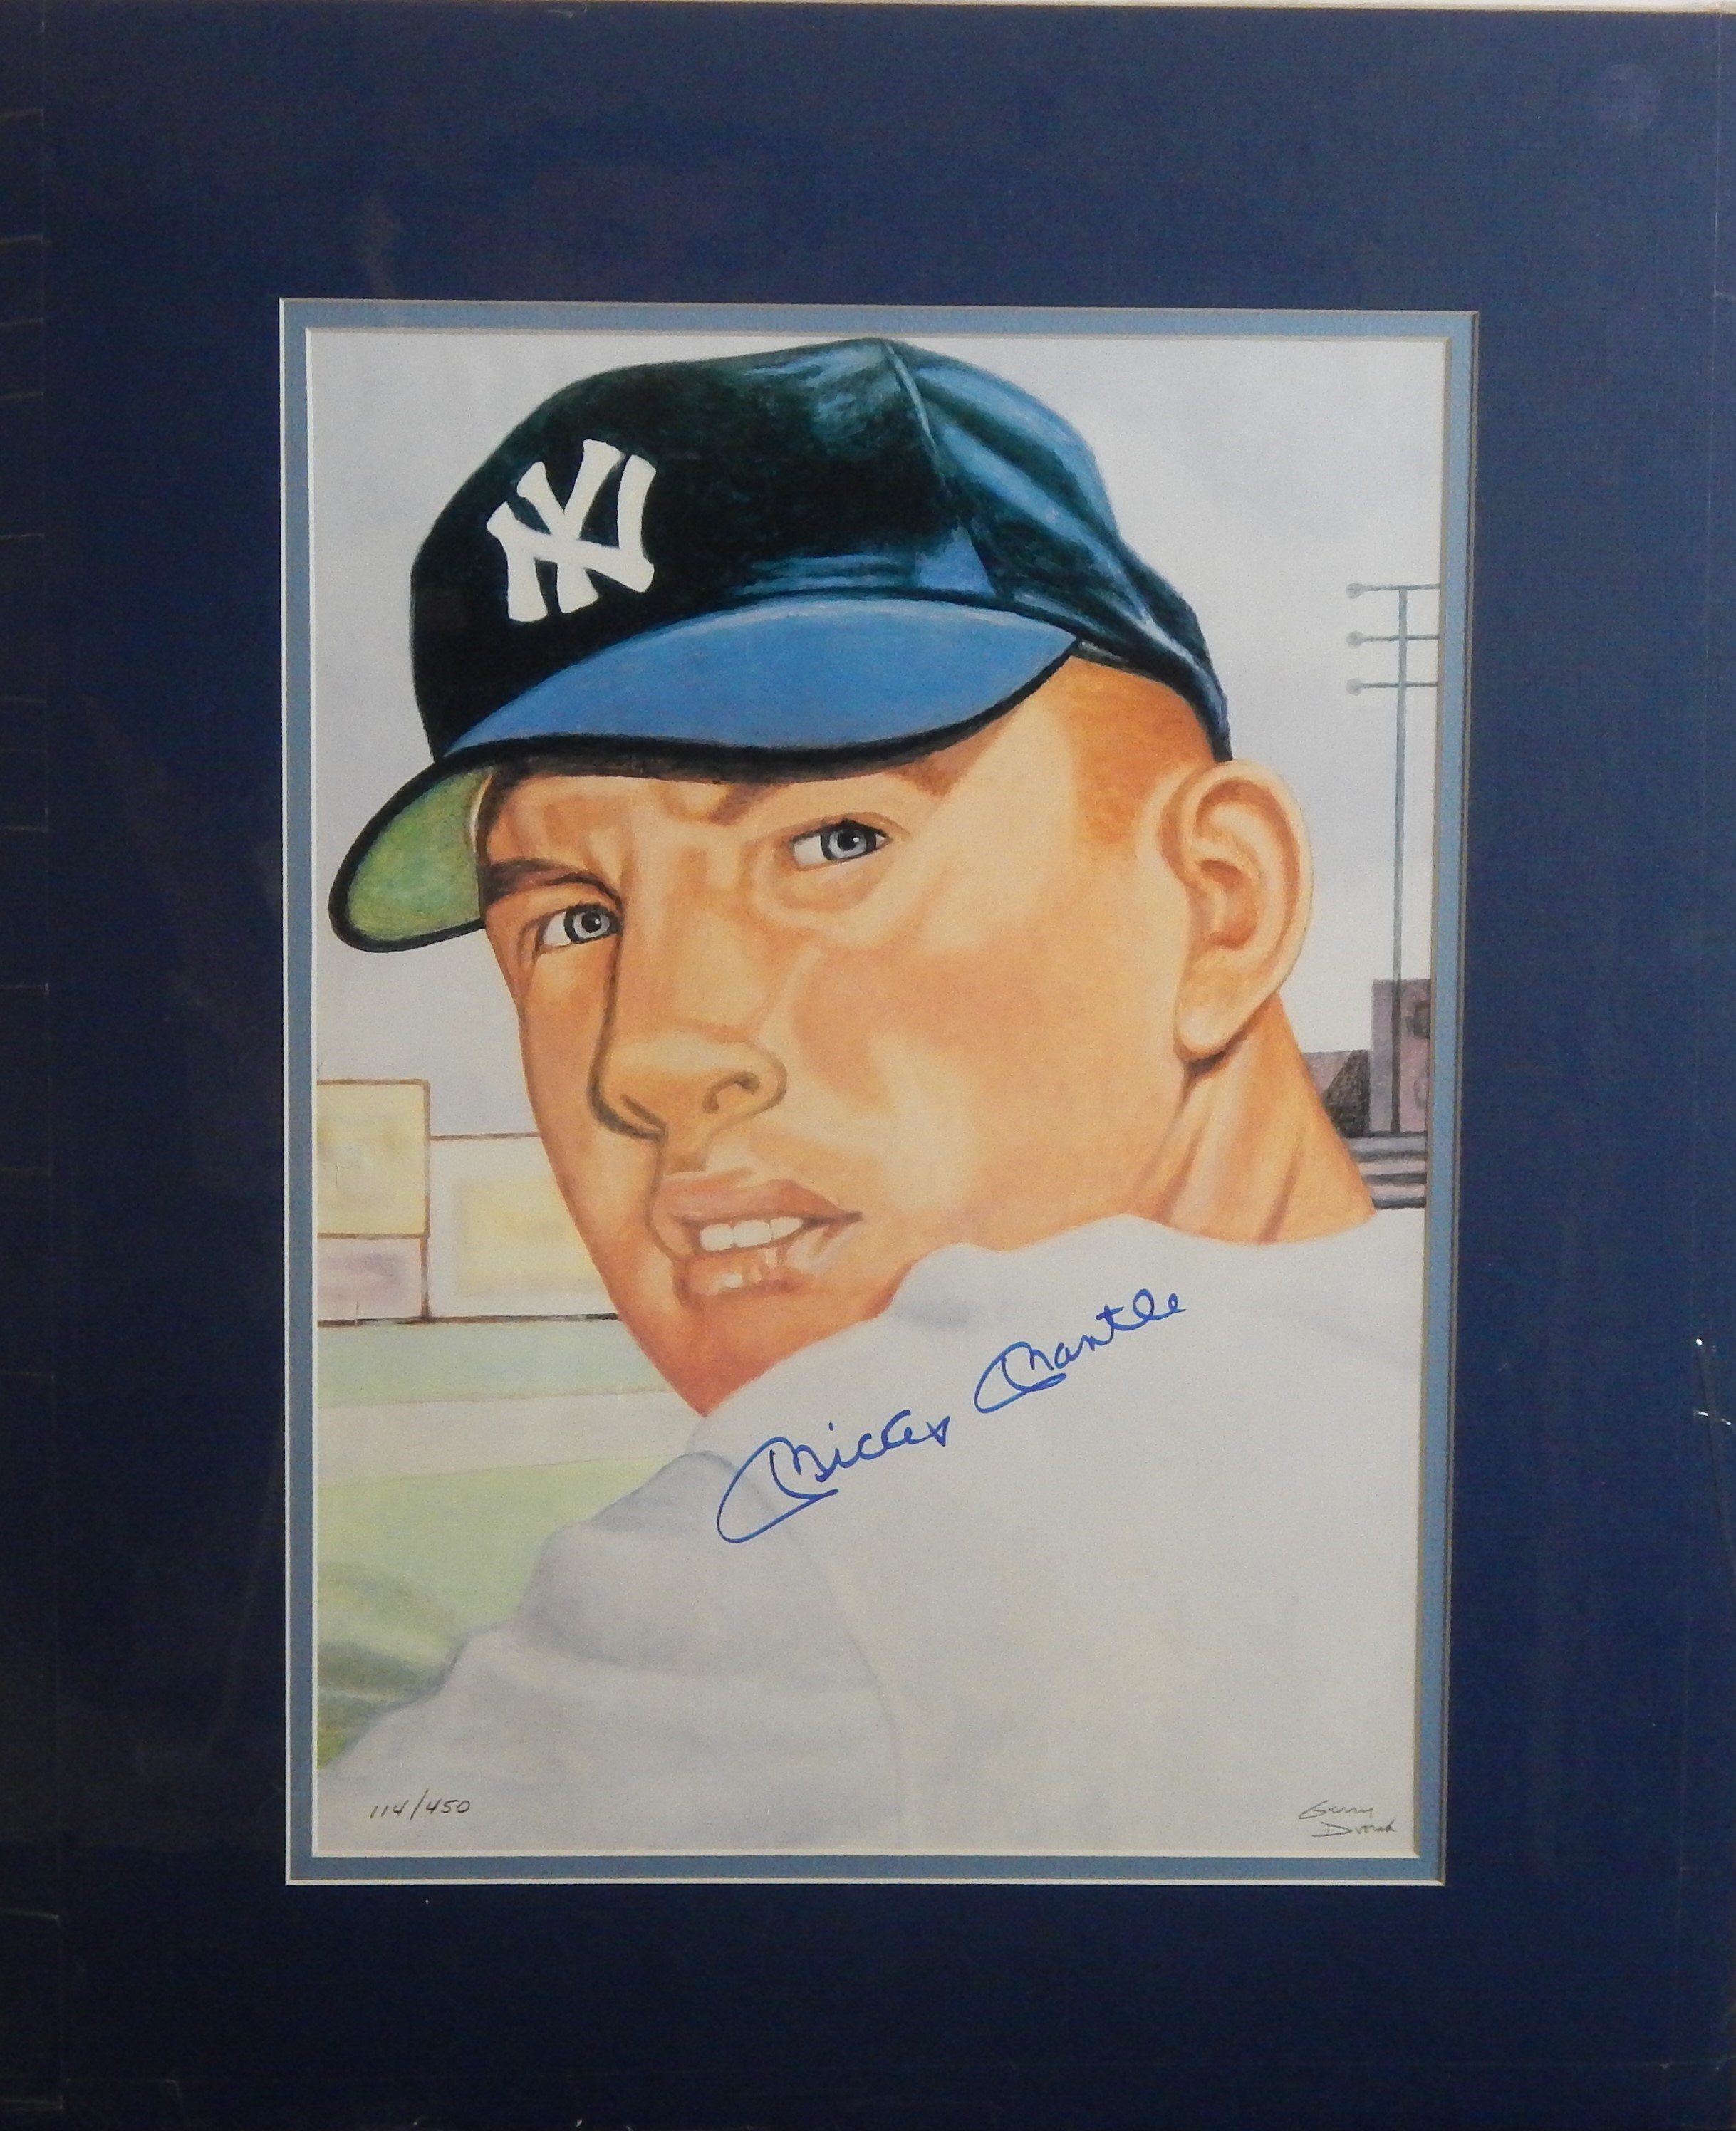 Baseball Autographs - Mickey Mantle Signed Limited Edition Lithograph by Gerry Dvorak